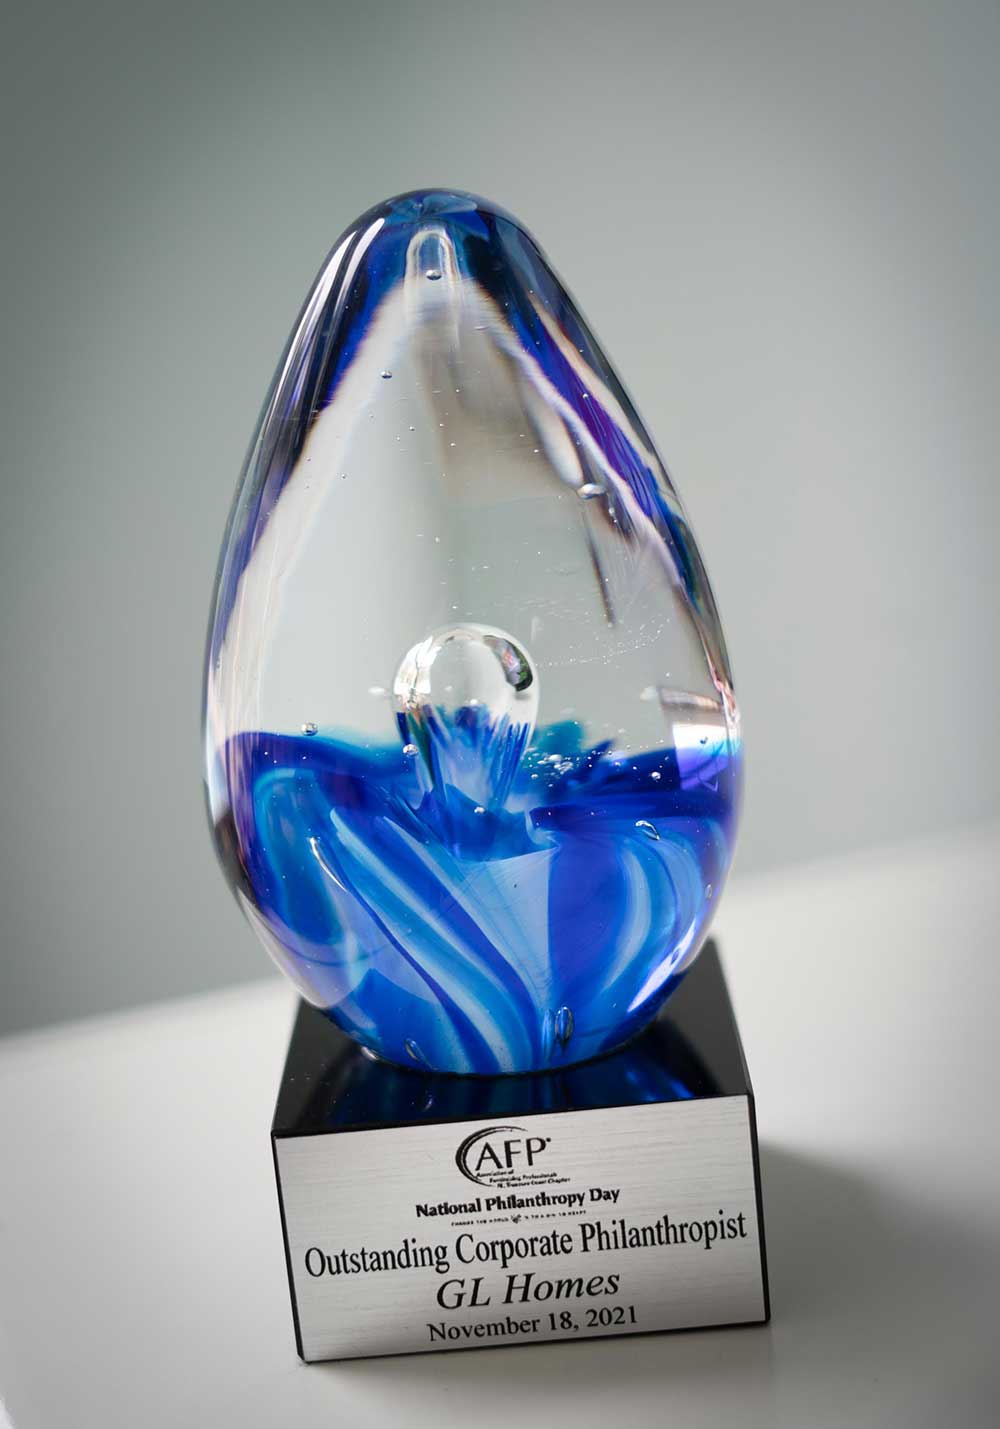 GL Homes wins the Outstanding Corporate Philanthropist Award